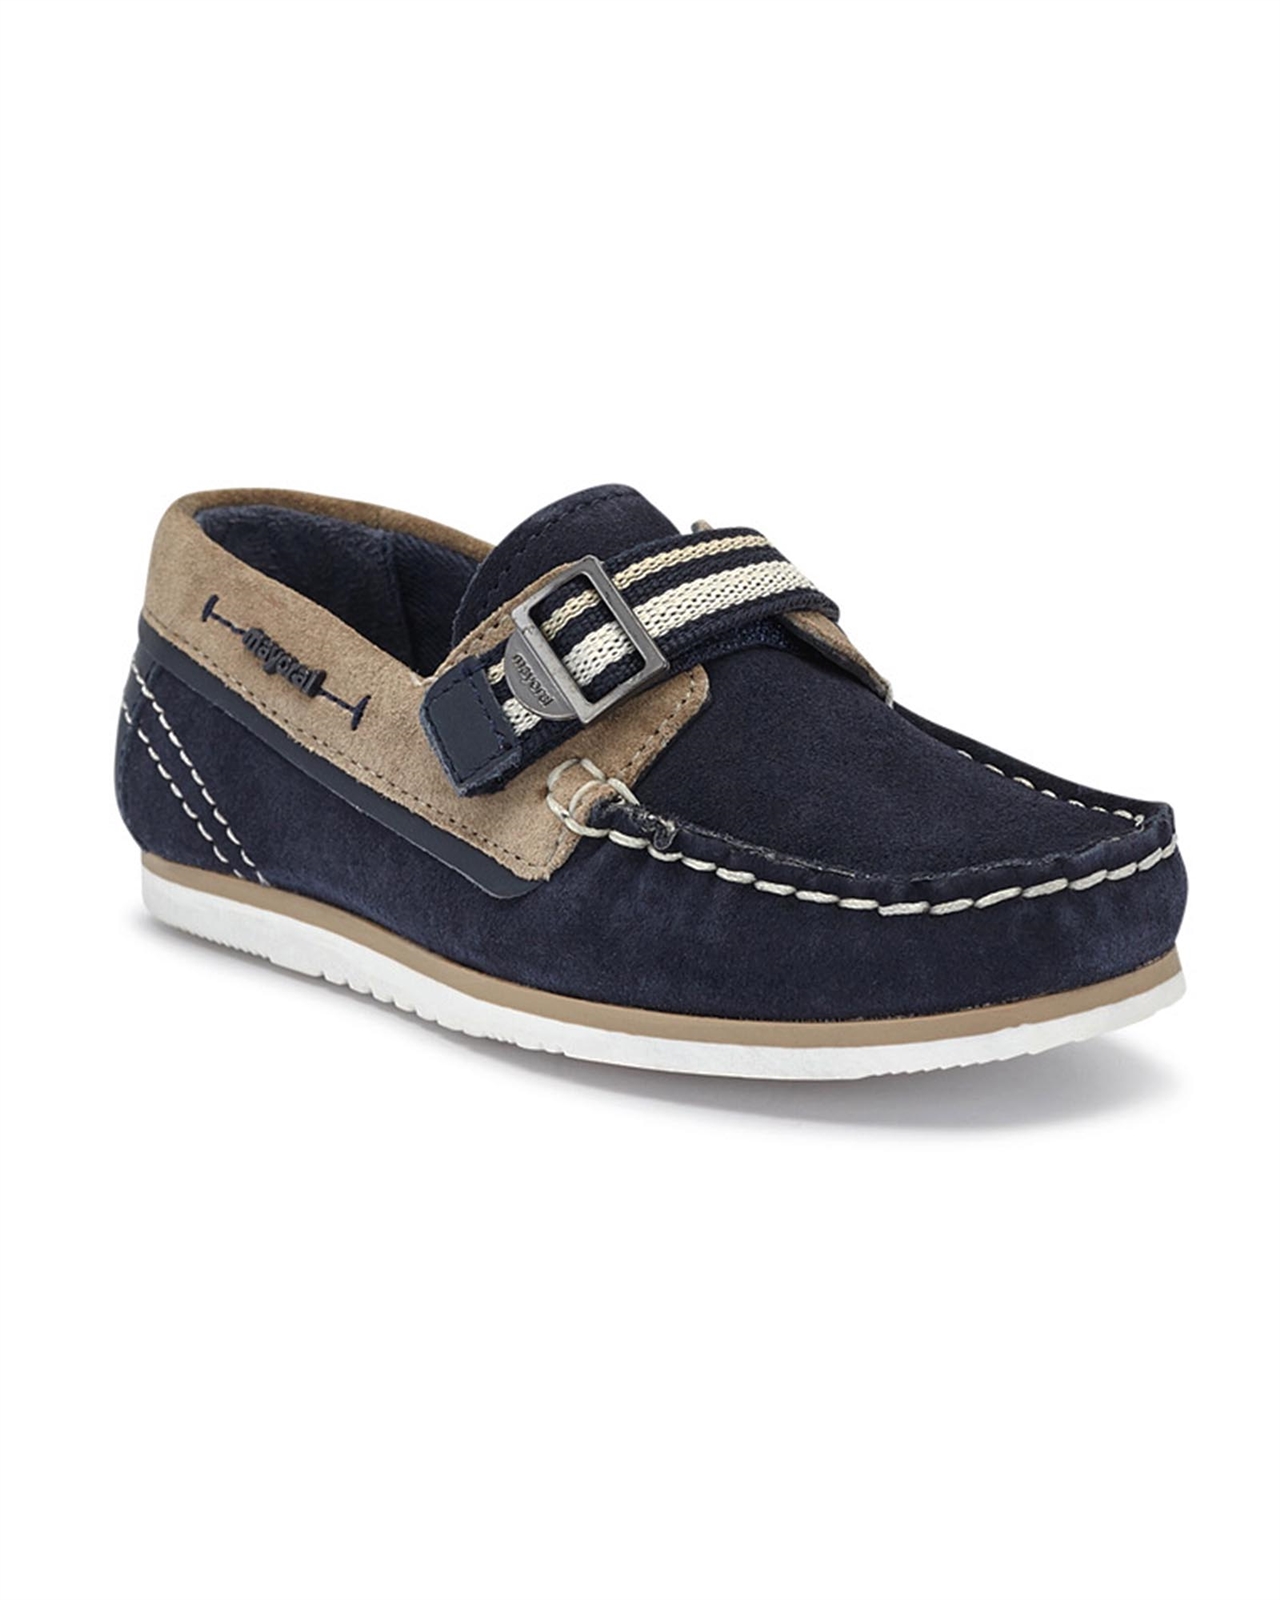 MAYORAL Boys Suede Boats Shoe in Navy - Mayoral Boys' Shoes Summer 2021 ...